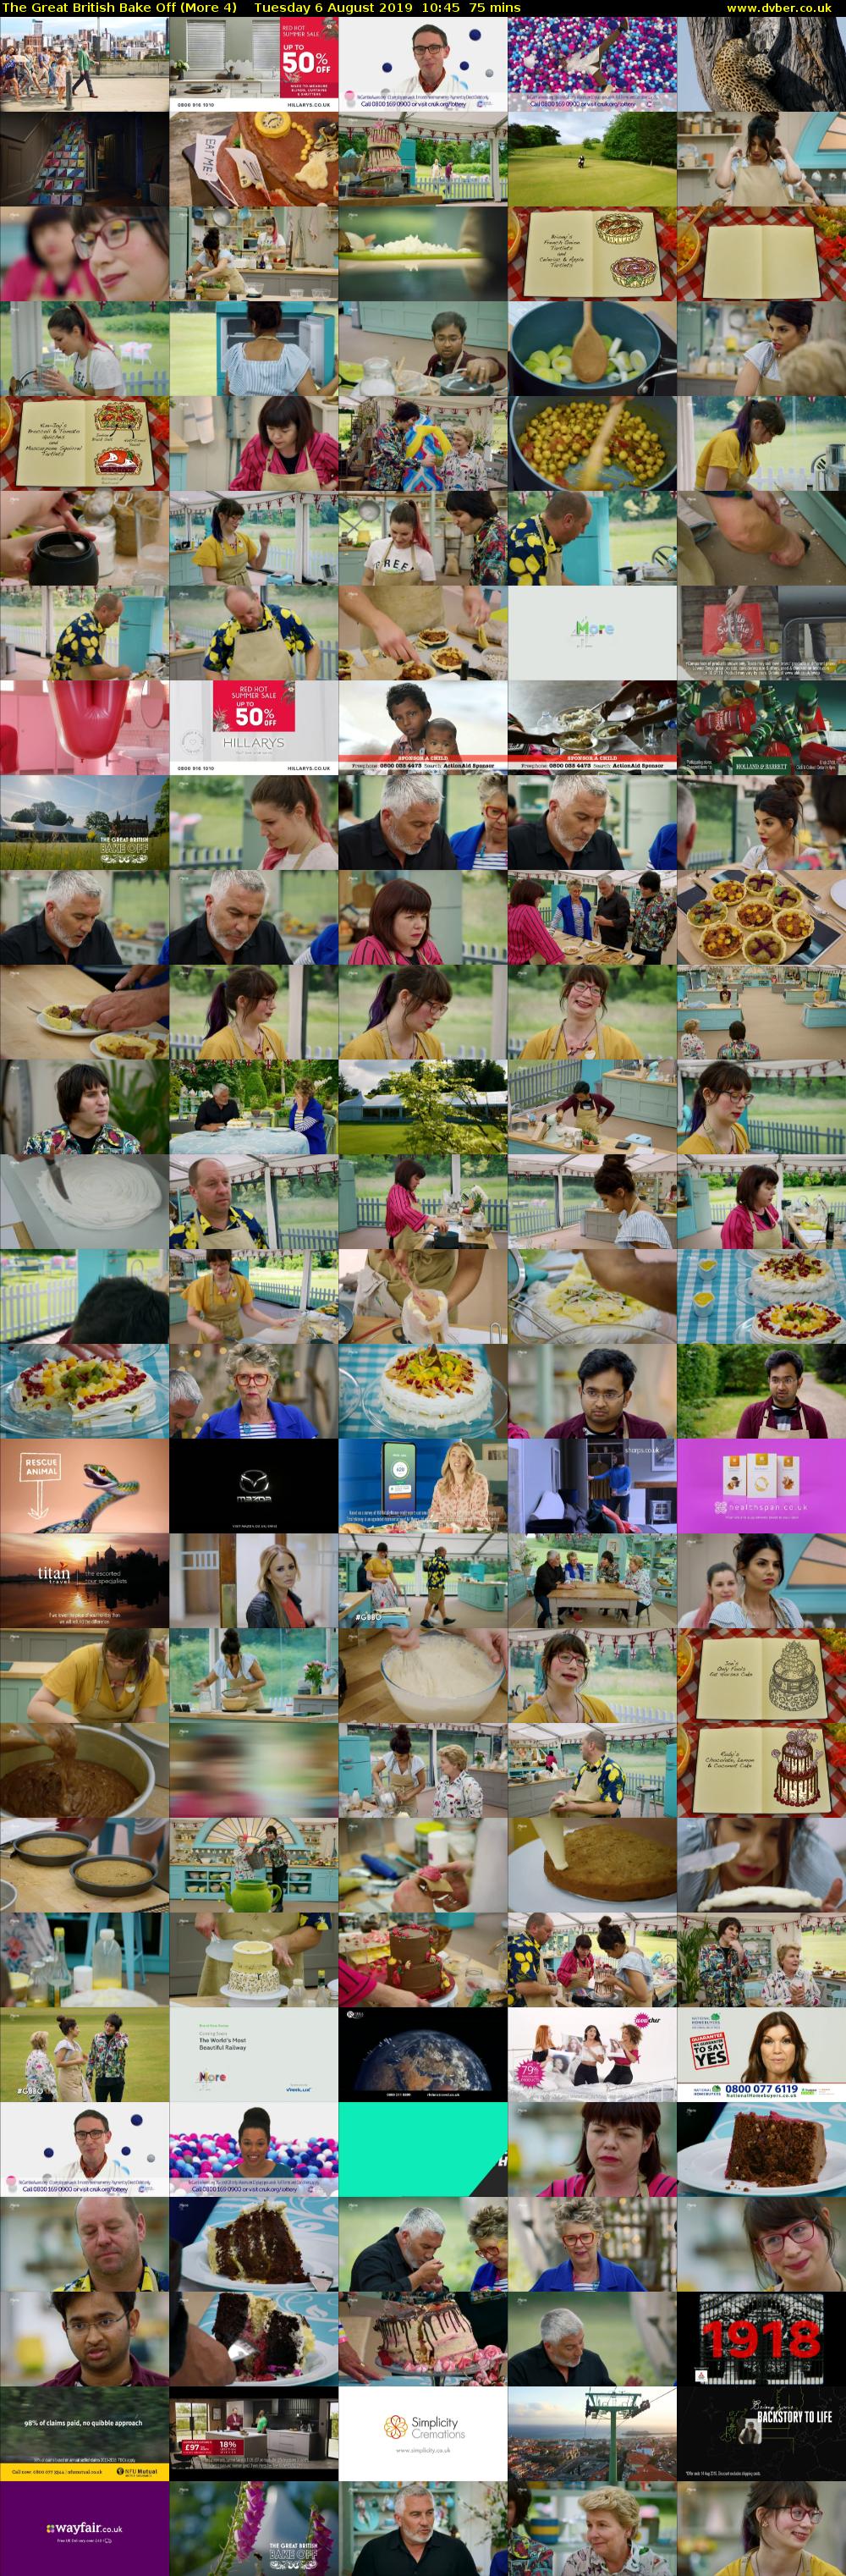 The Great British Bake Off (More 4) Tuesday 6 August 2019 10:45 - 12:00